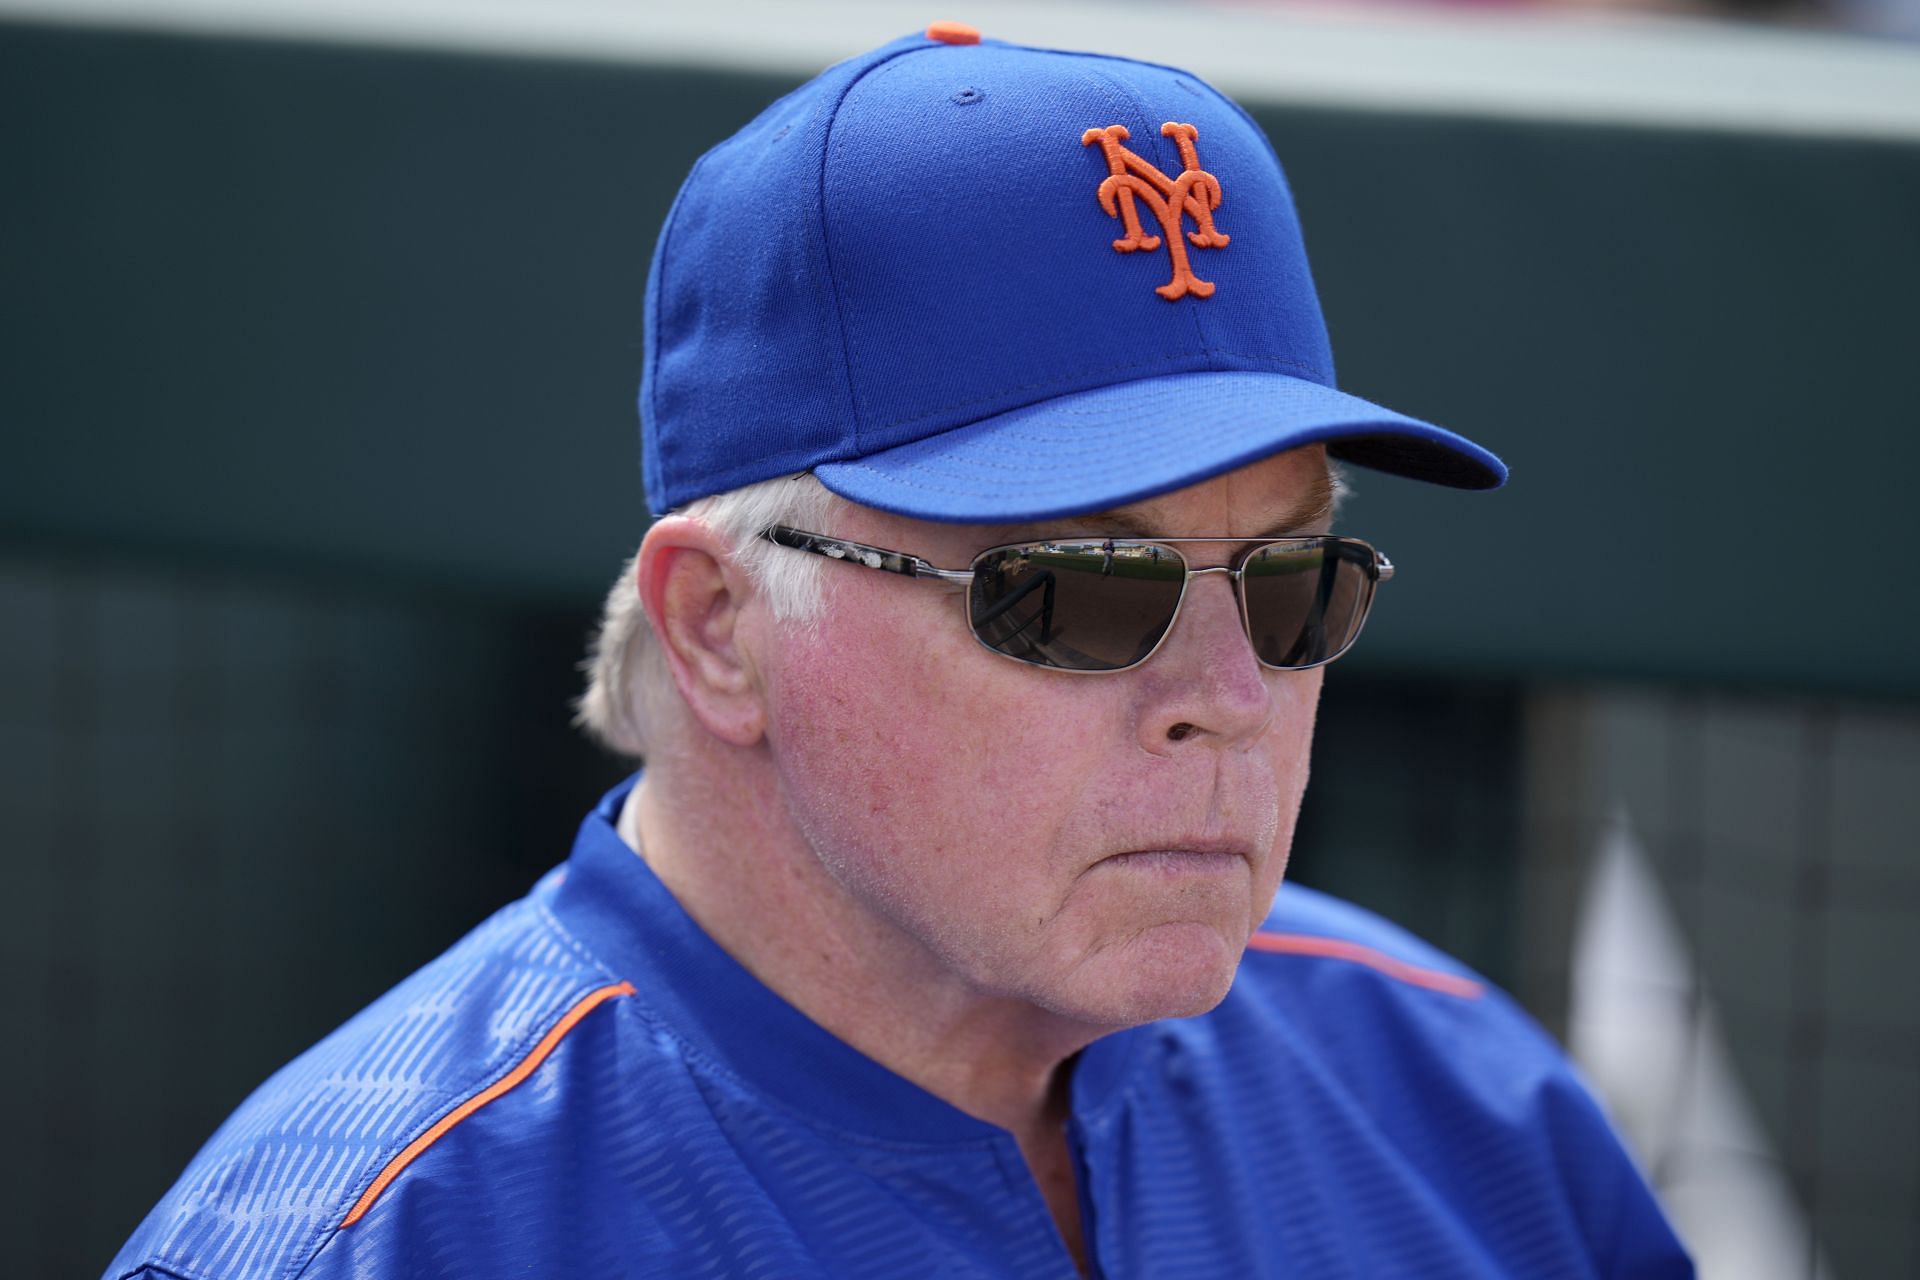 Longest 9-inning NY Mets playoff game includes a wiser Buck Showalter